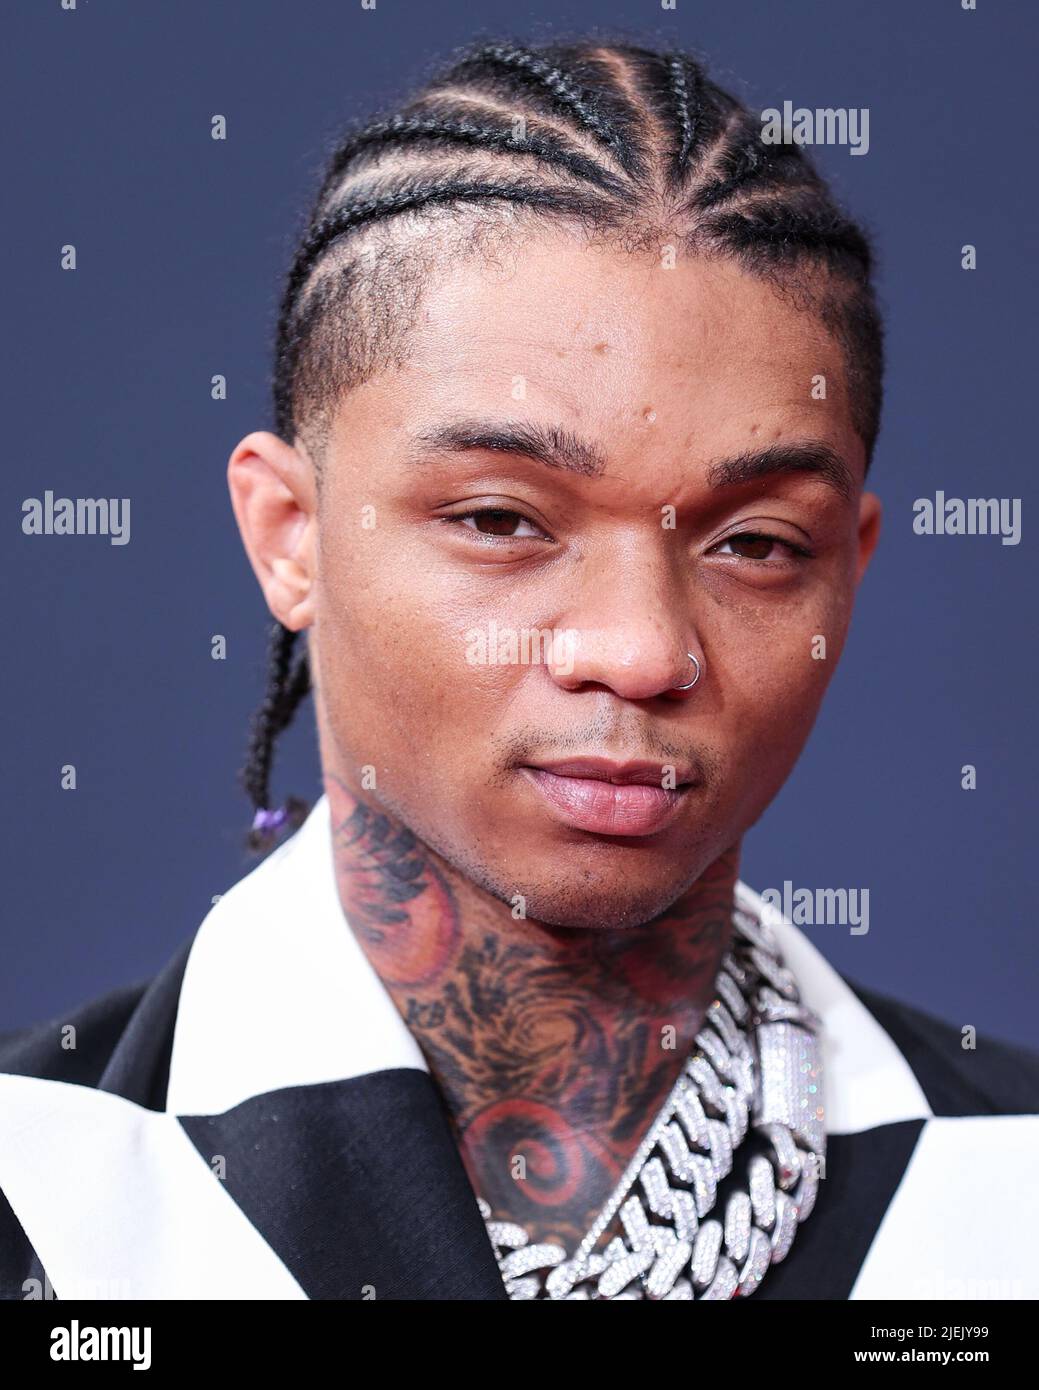 LOS ANGELES, CALIFORNIA, USA - JUNE 26: Swae Lee of Rae Sremmurd arrives at the BET Awards 2022 held at Microsoft Theater at L.A. Live on June 26, 2022 in Los Angeles, California, United States. (Photo by Xavier Collin/Image Press Agency) Credit: Image Press Agency/Alamy Live News Stock Photo